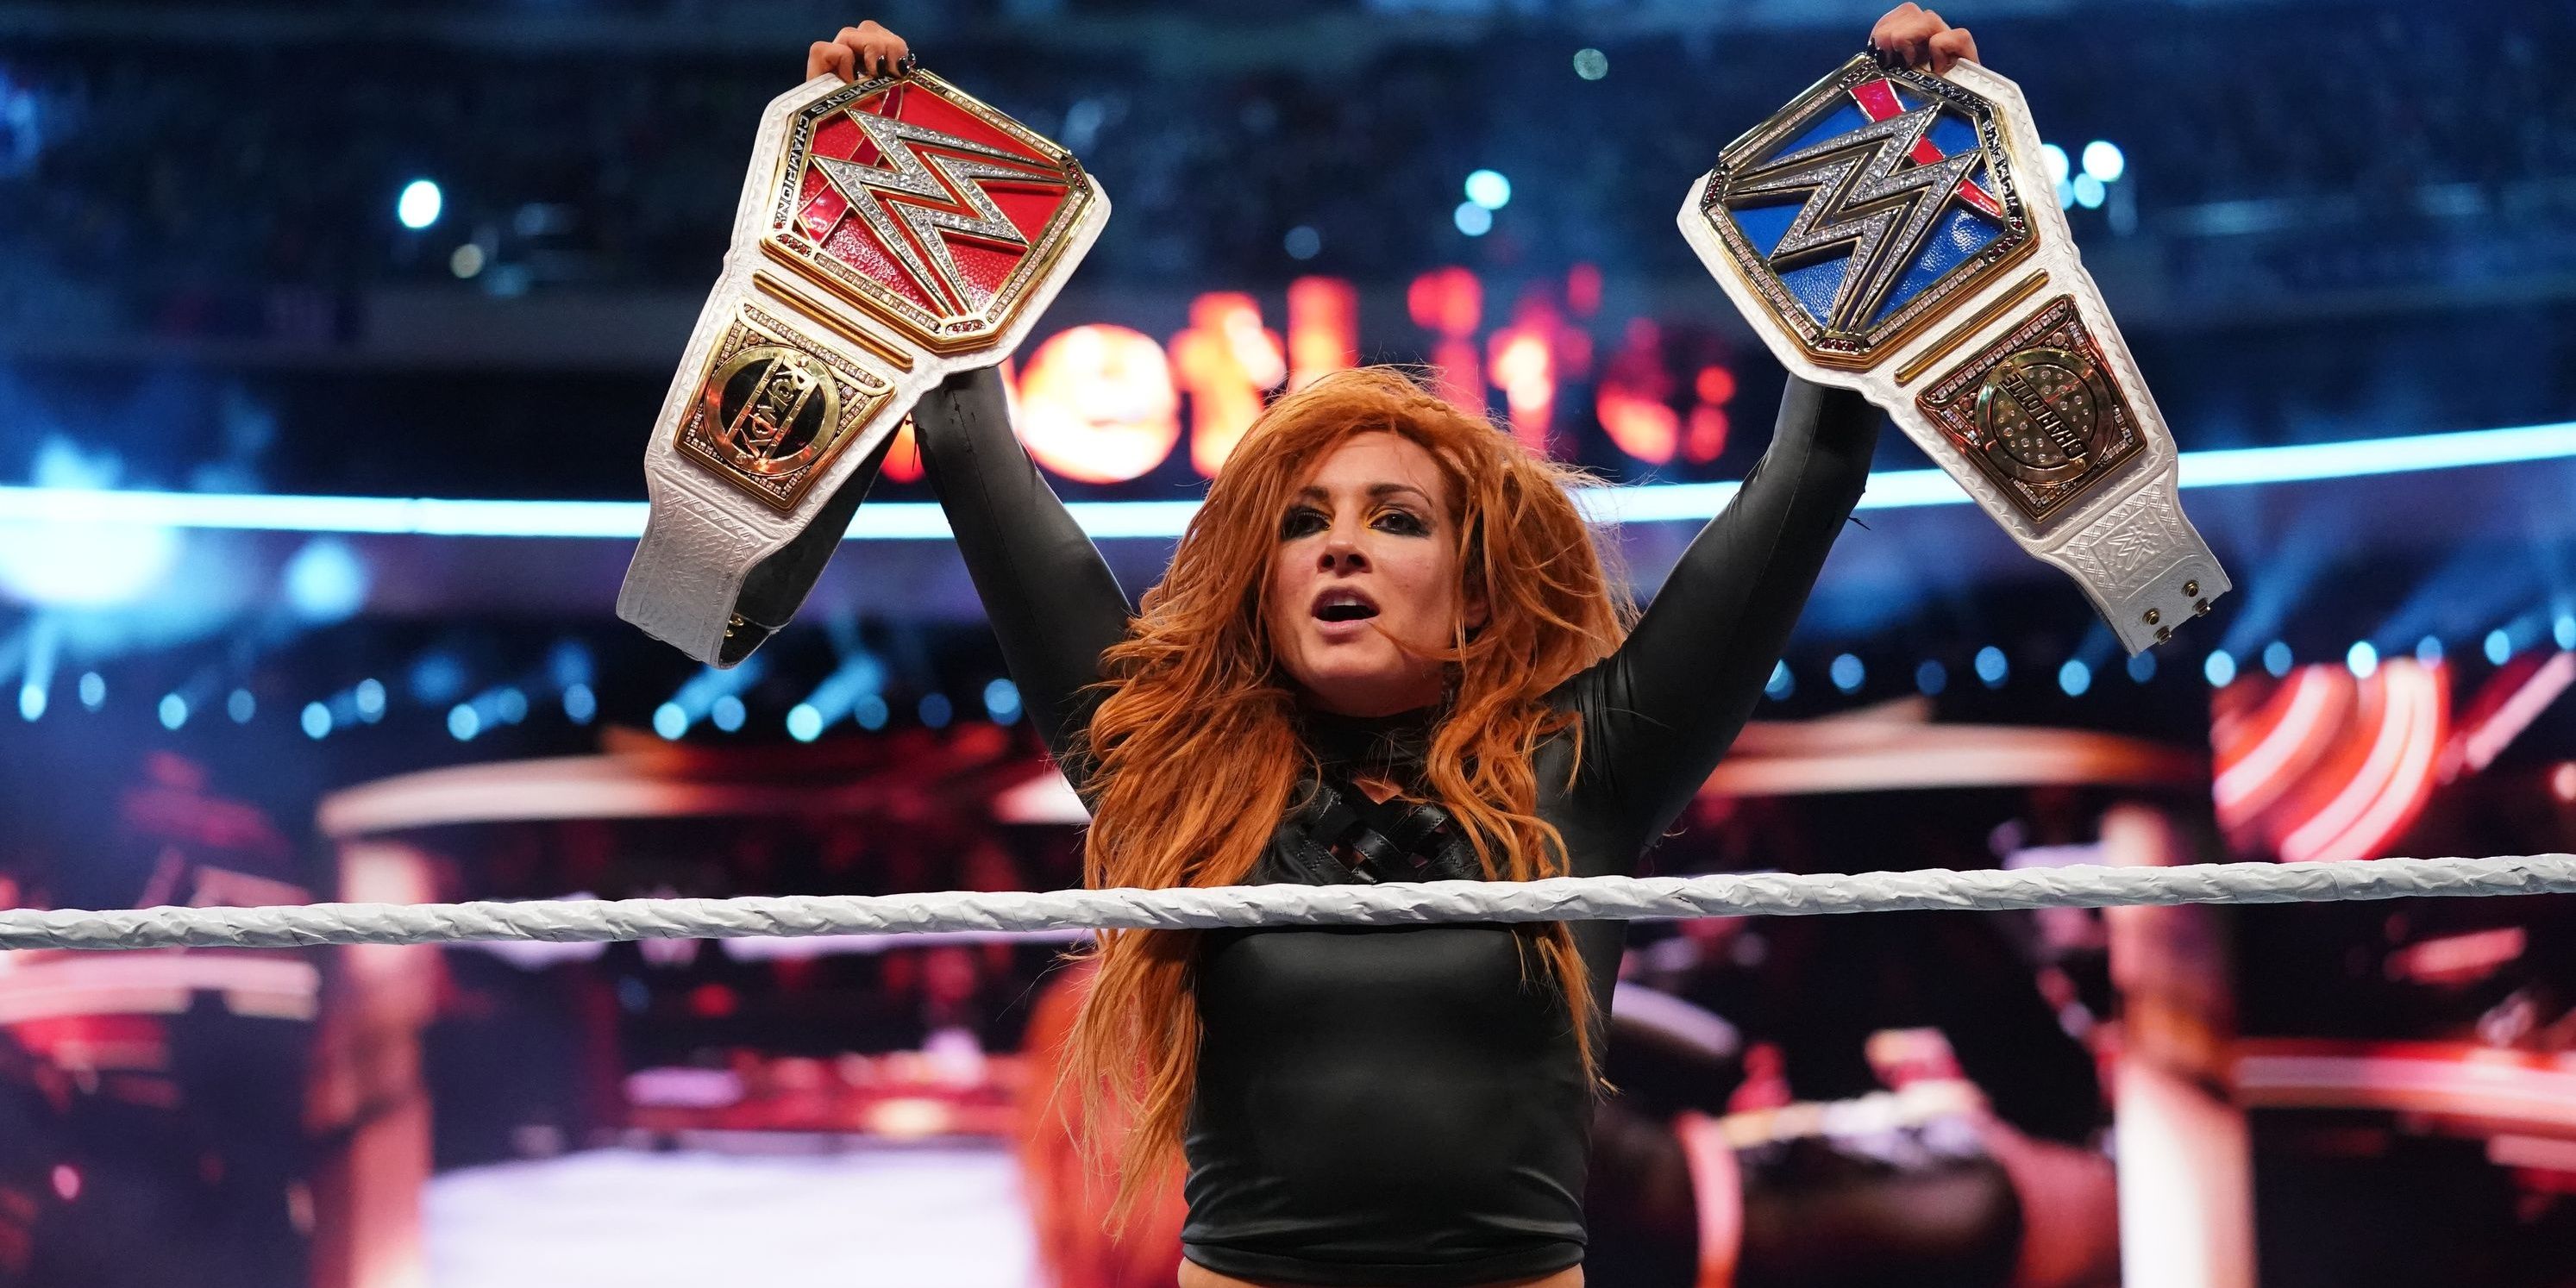 Becky Lynch had a great reign as Raw Women's Champion